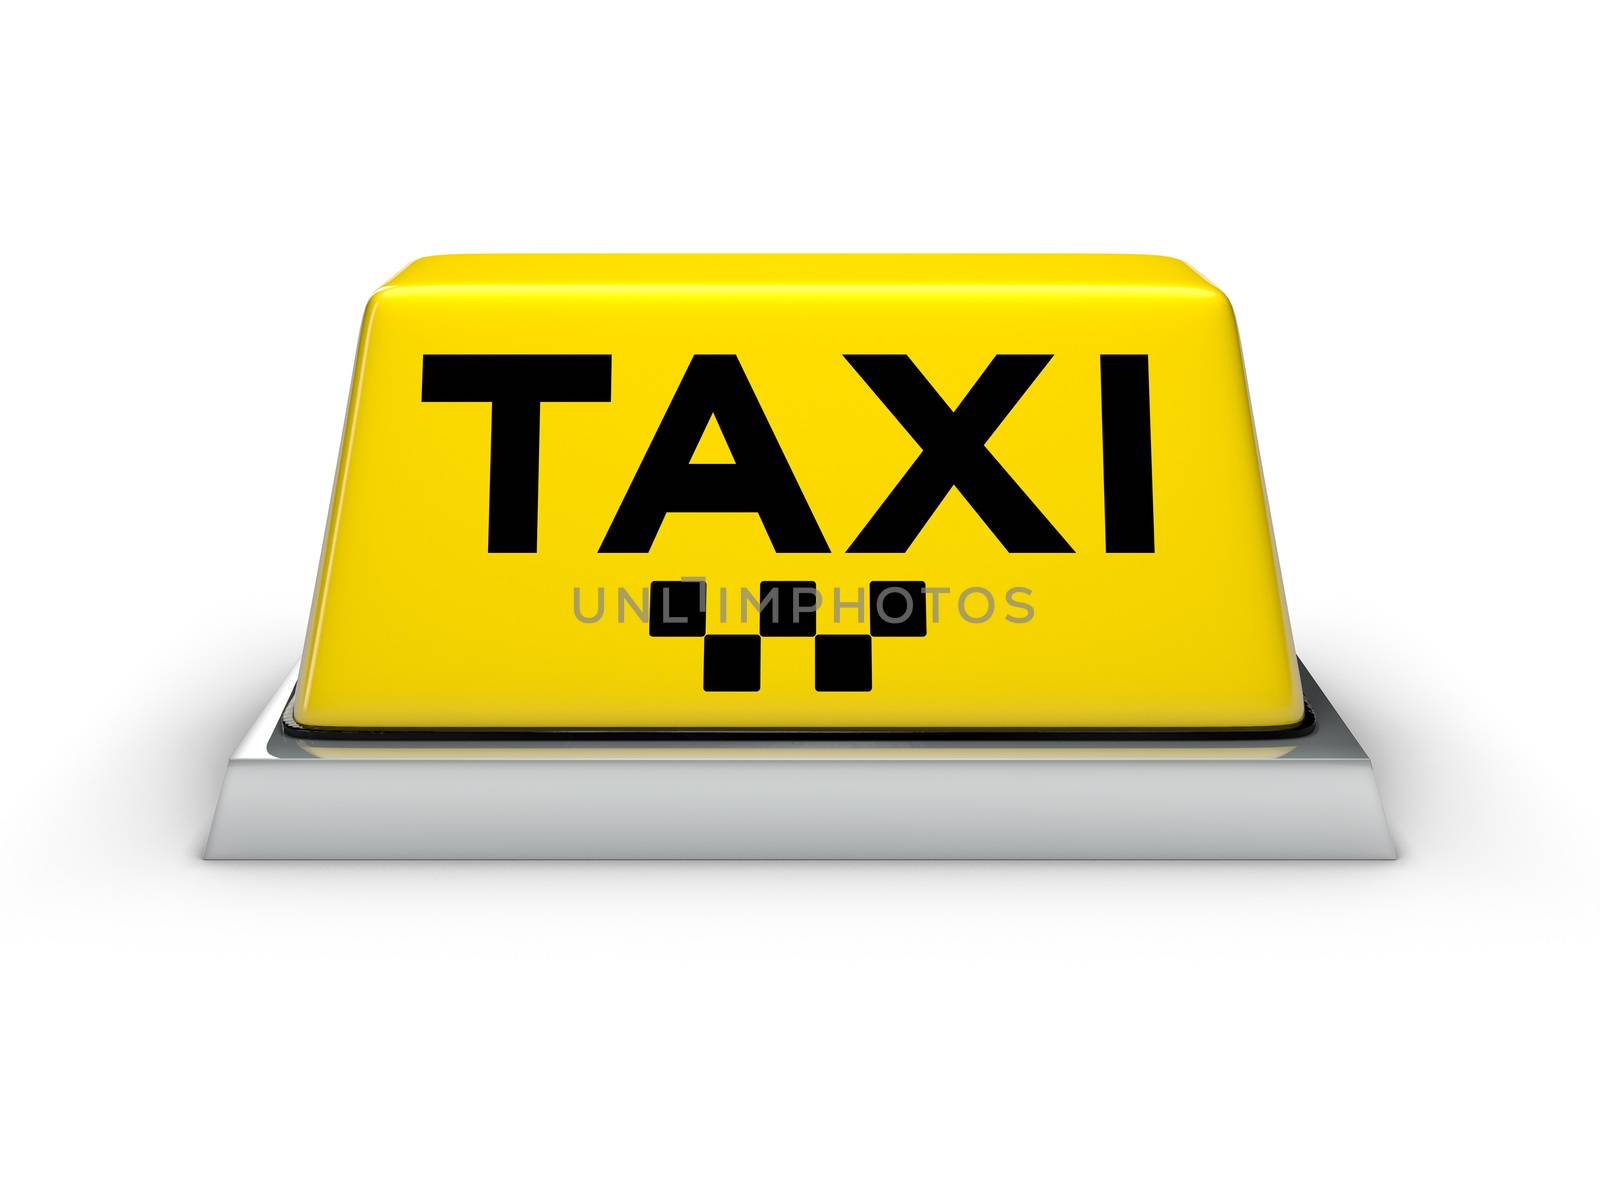 Taxi sign isolated on white